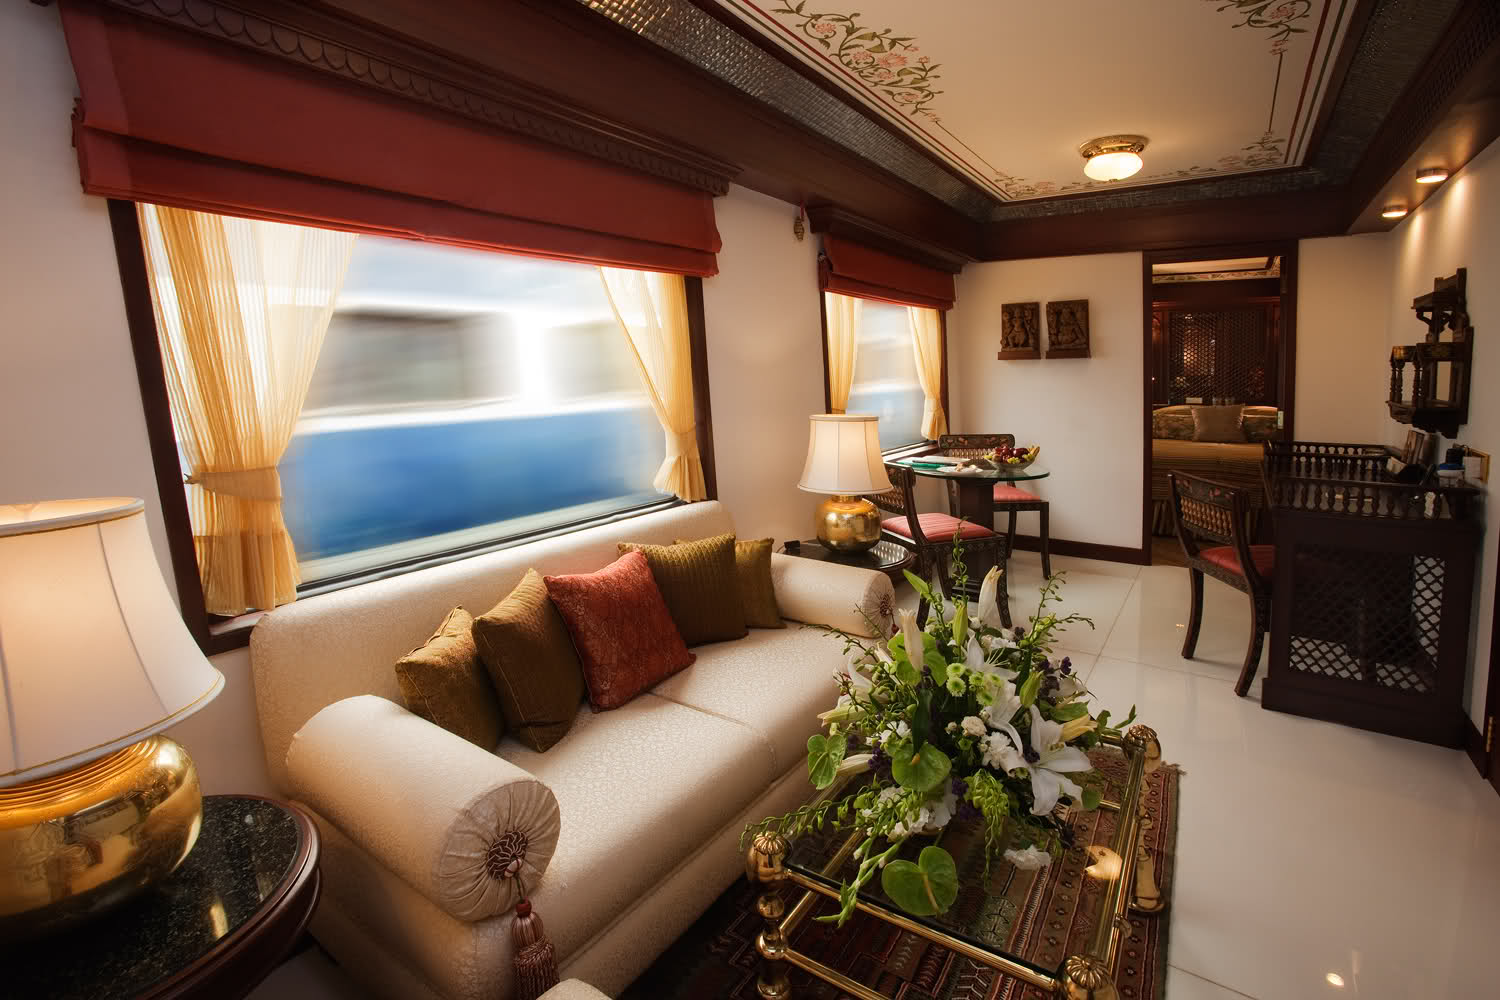 Maharajas Express Presidential-Suite Fare in Hindi